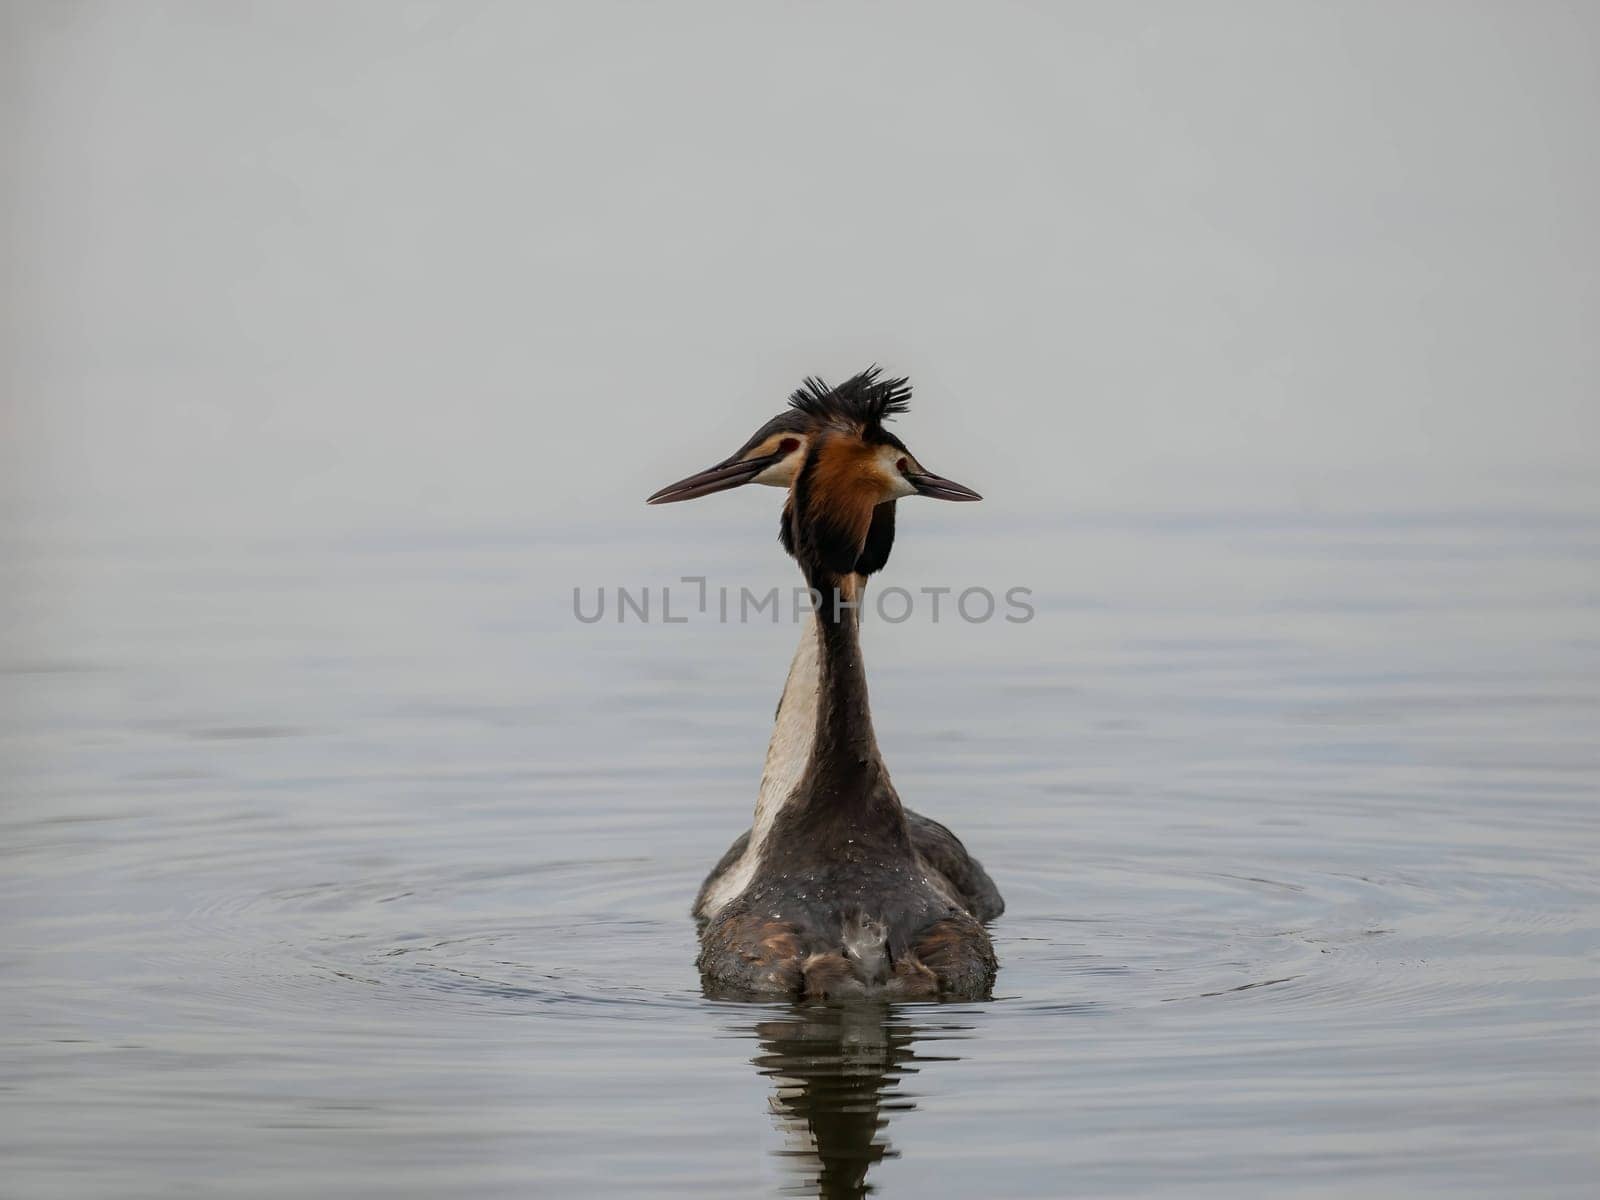 Close-up photo of a male and female Great Crested Grebe together on the water. (75 characters)